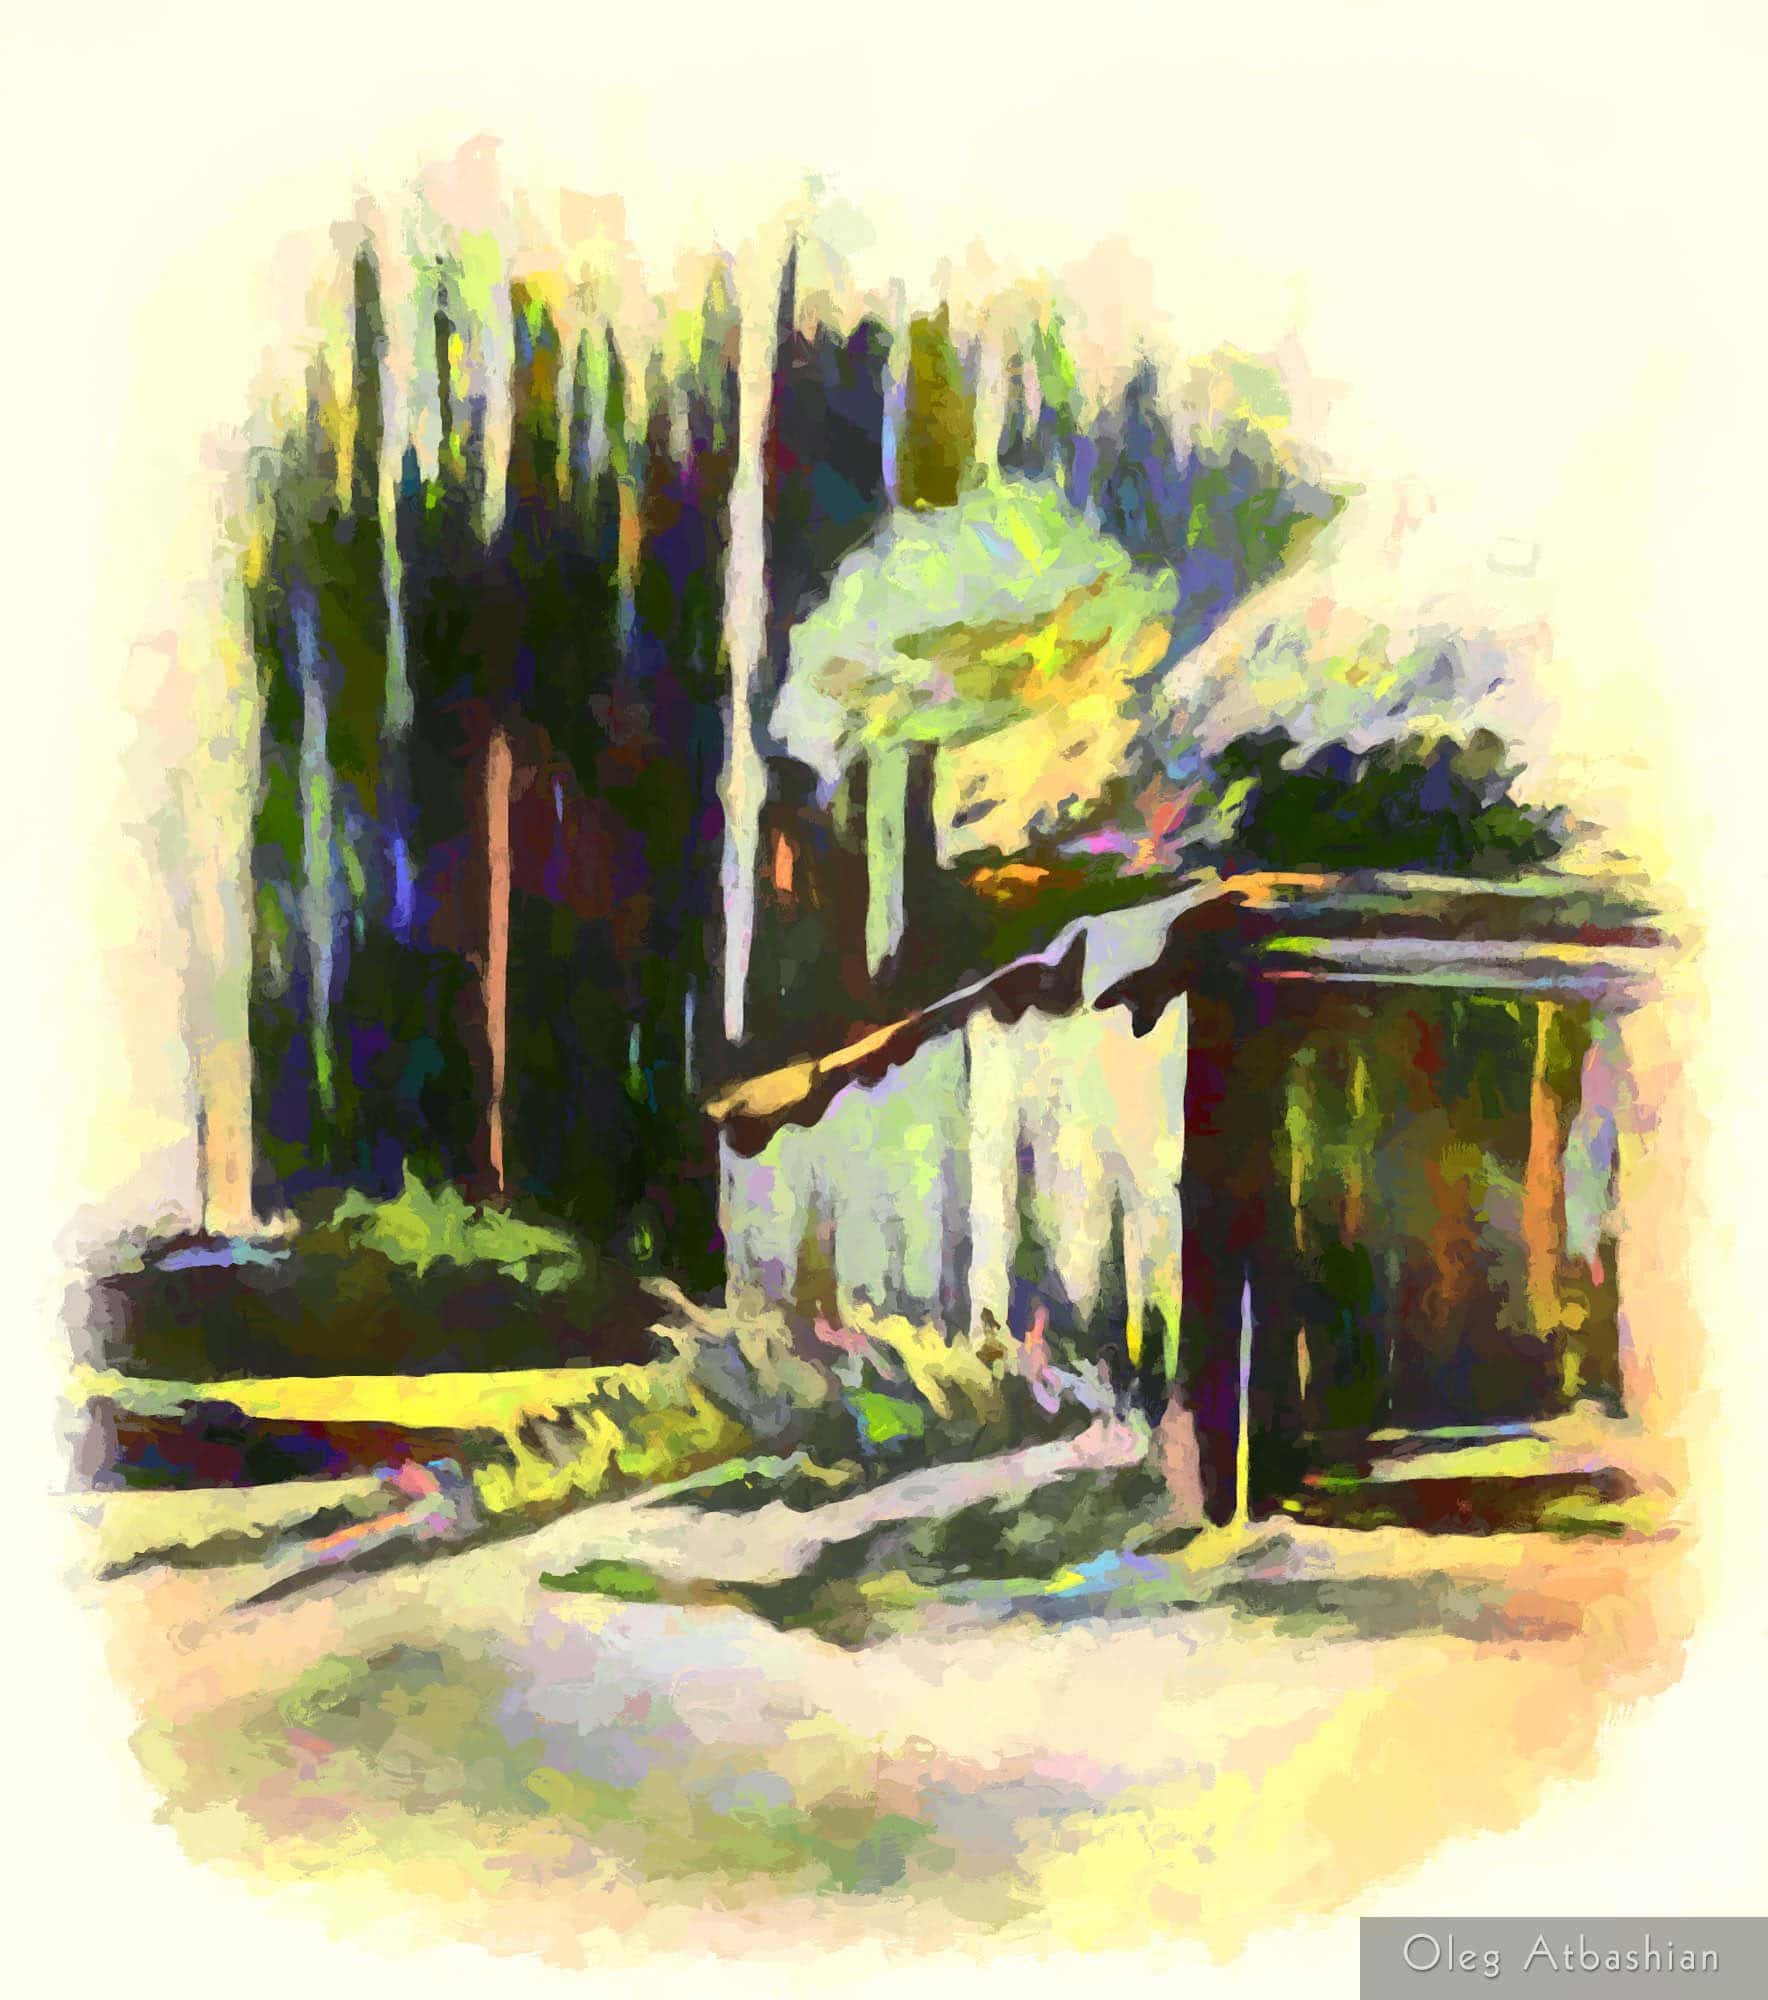 Sketch of a Shed